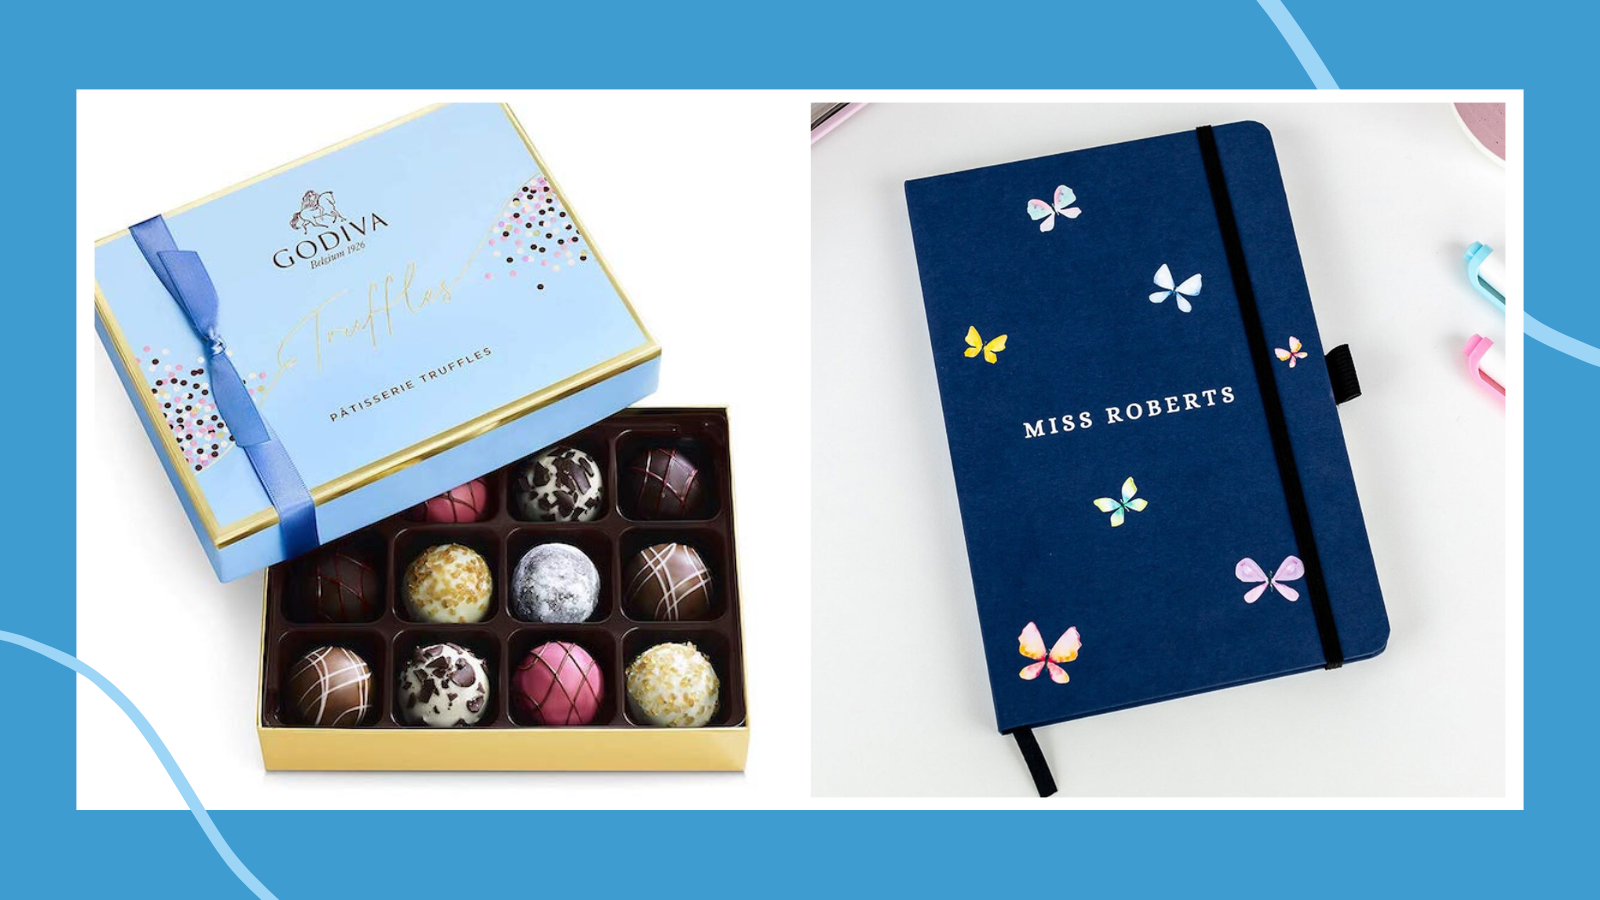 Collage of best teacher gifts, including Godiva chocolates and a personalized notebook